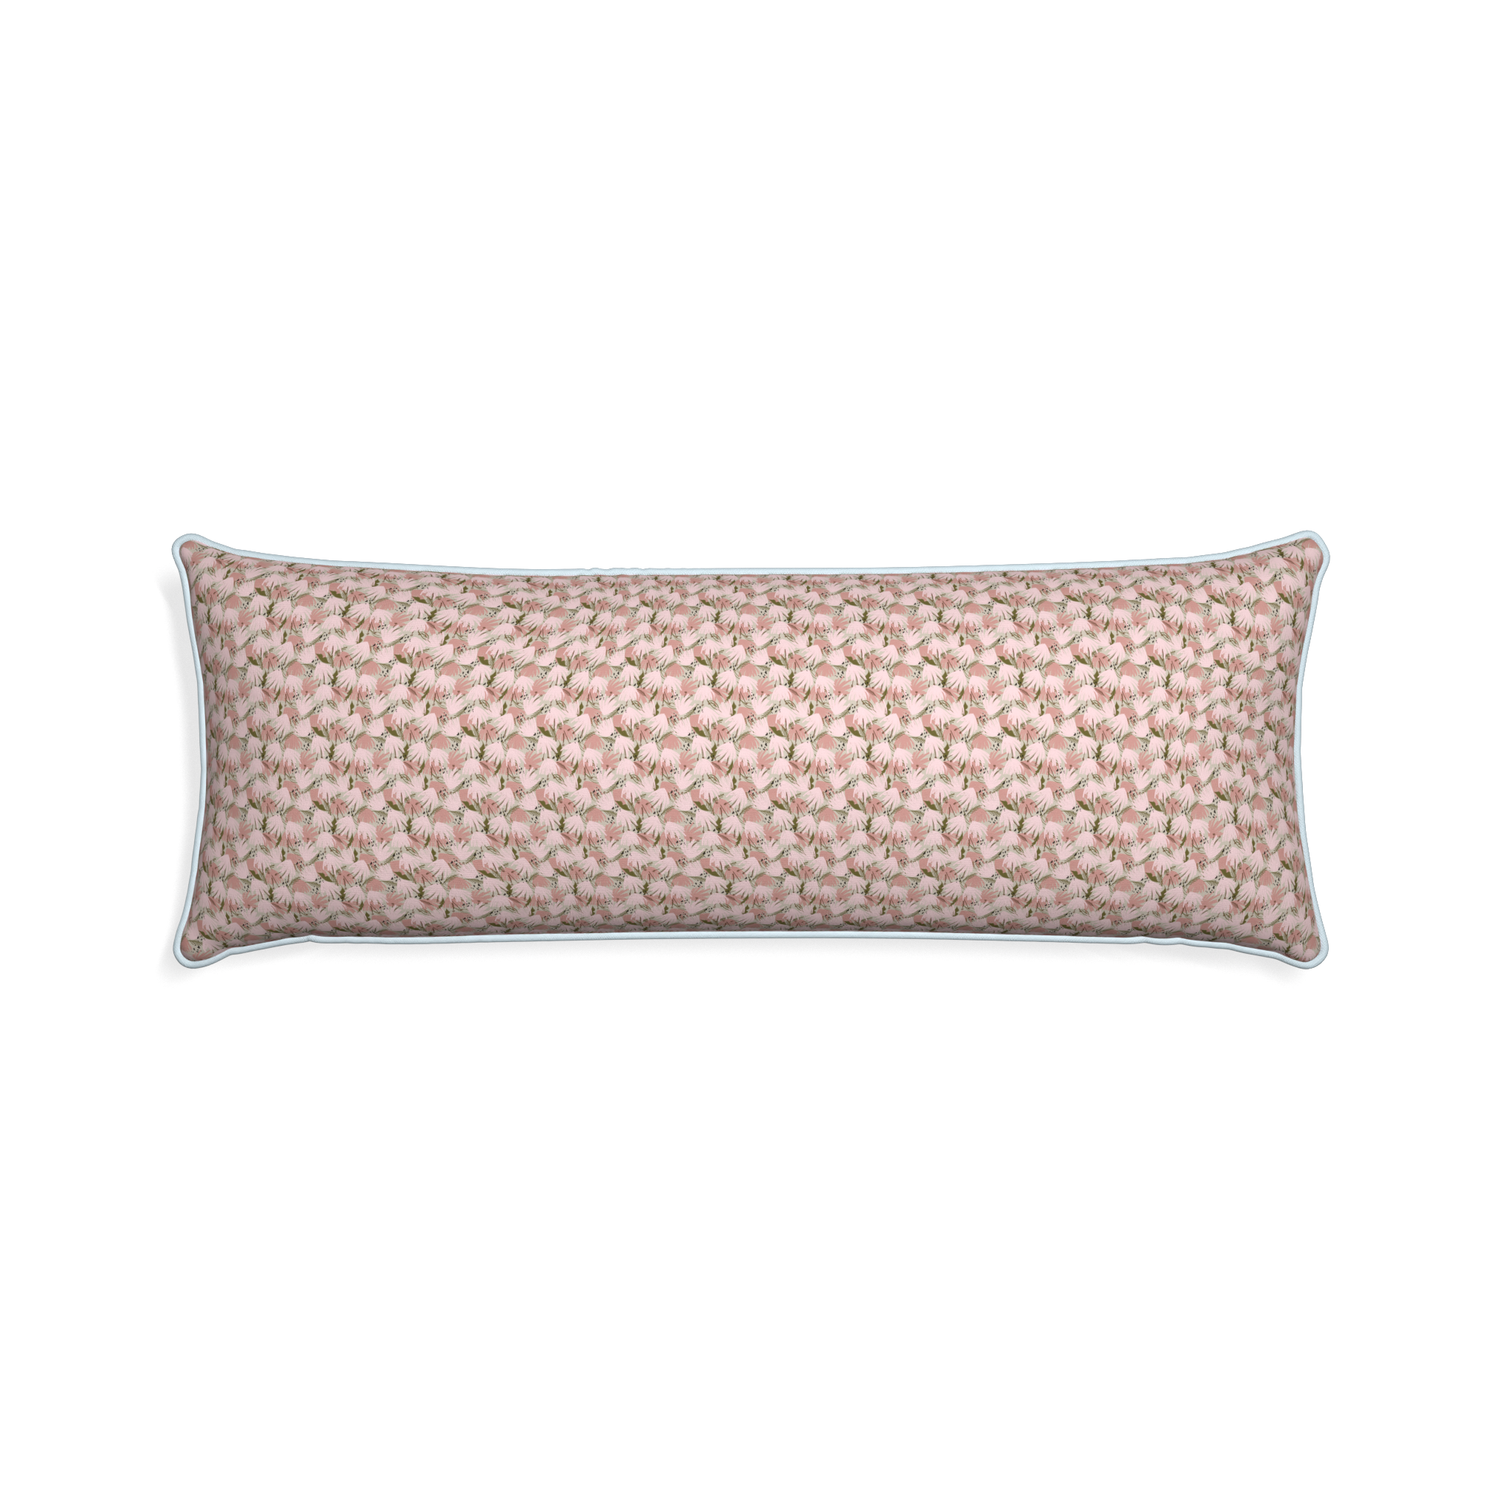 Xl-lumbar eden pink custom pink floralpillow with powder piping on white background